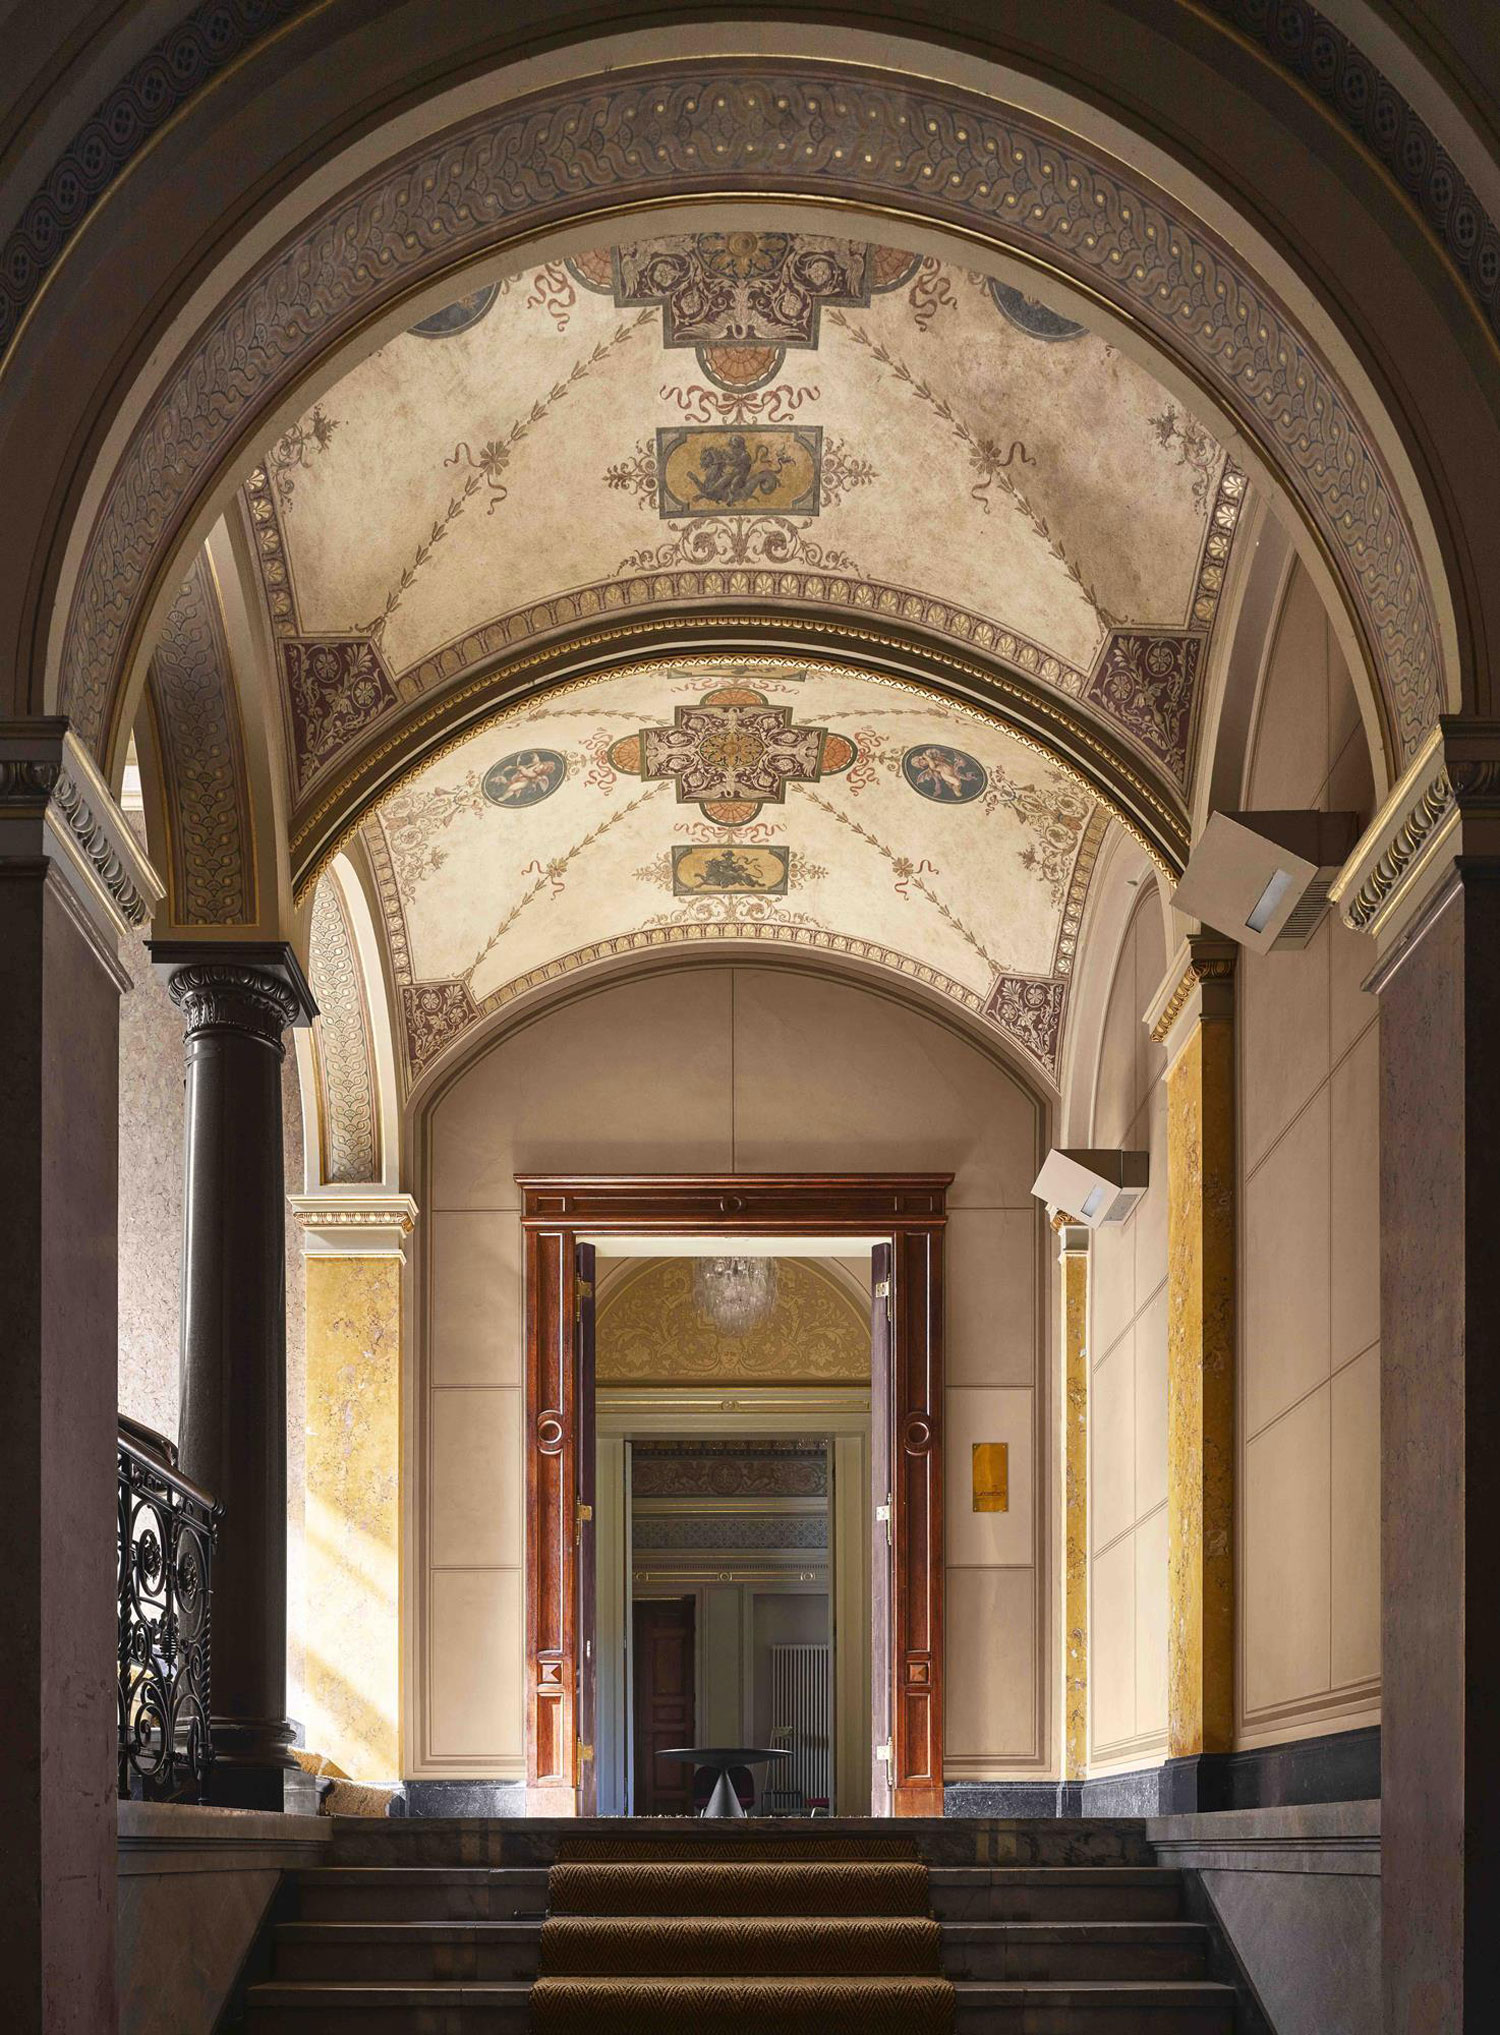 Grand C19th Palais in Berlin Reimagined as an Office by David Kohn Architects.-17